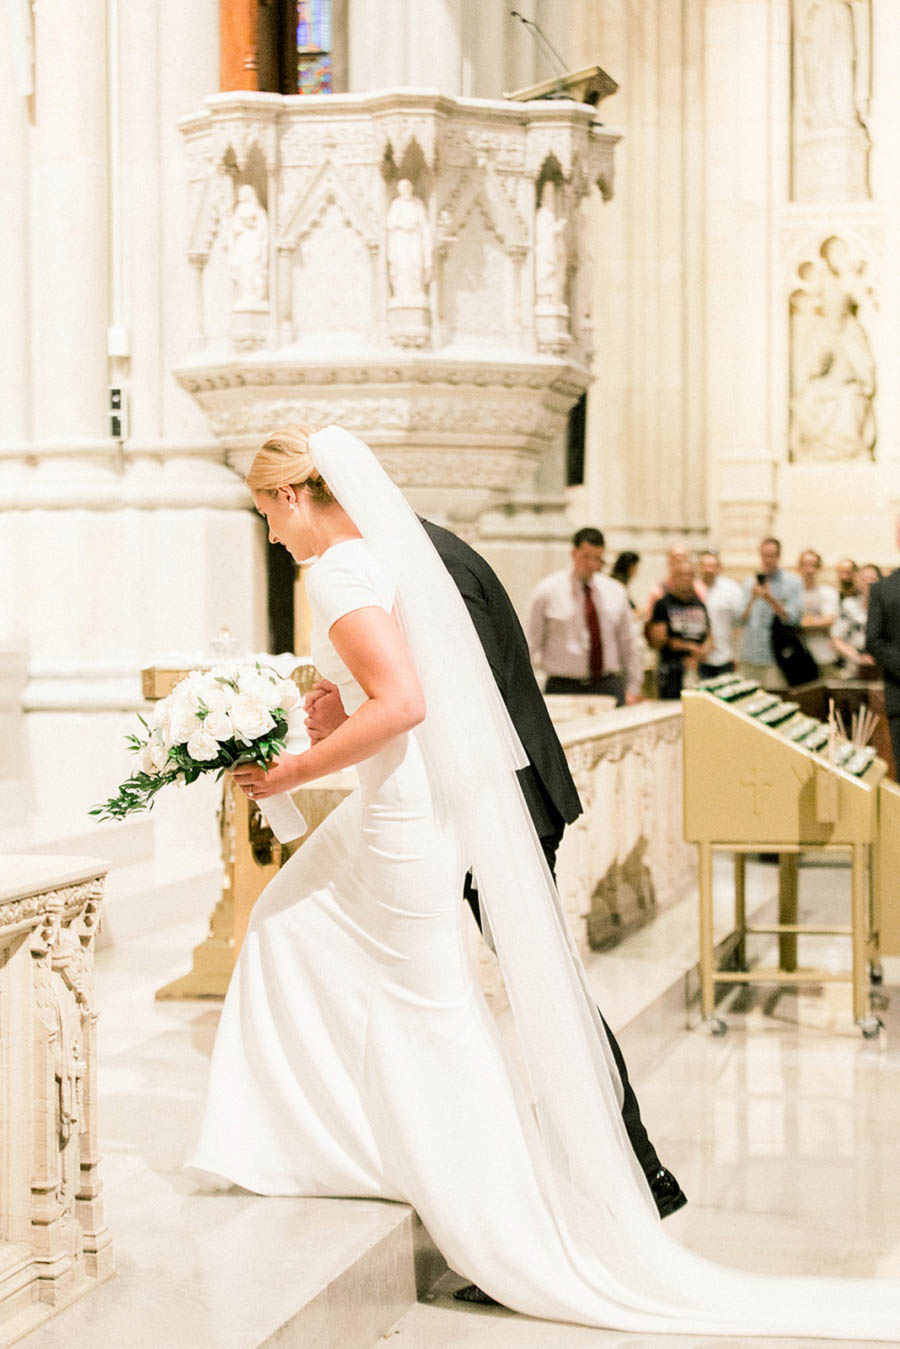 Margaret and Ryan enter their St. Patrick's Cathedral wedding ceremony in this photo by New York wedding photographer Amy Rizzuto.